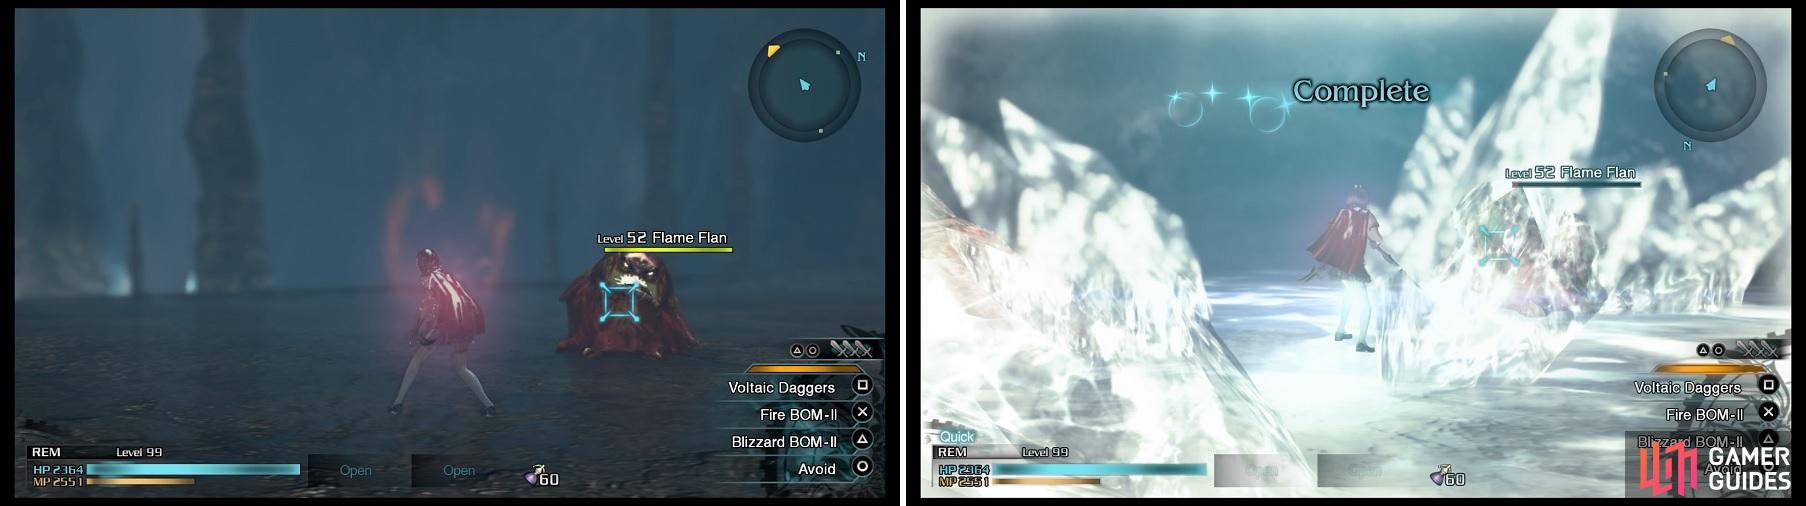 The Flame Flans (left) you will encounter shortly are a lot higher in level than the suggested one. For the SO you will get against them, any ice-elemental attack will do (right).